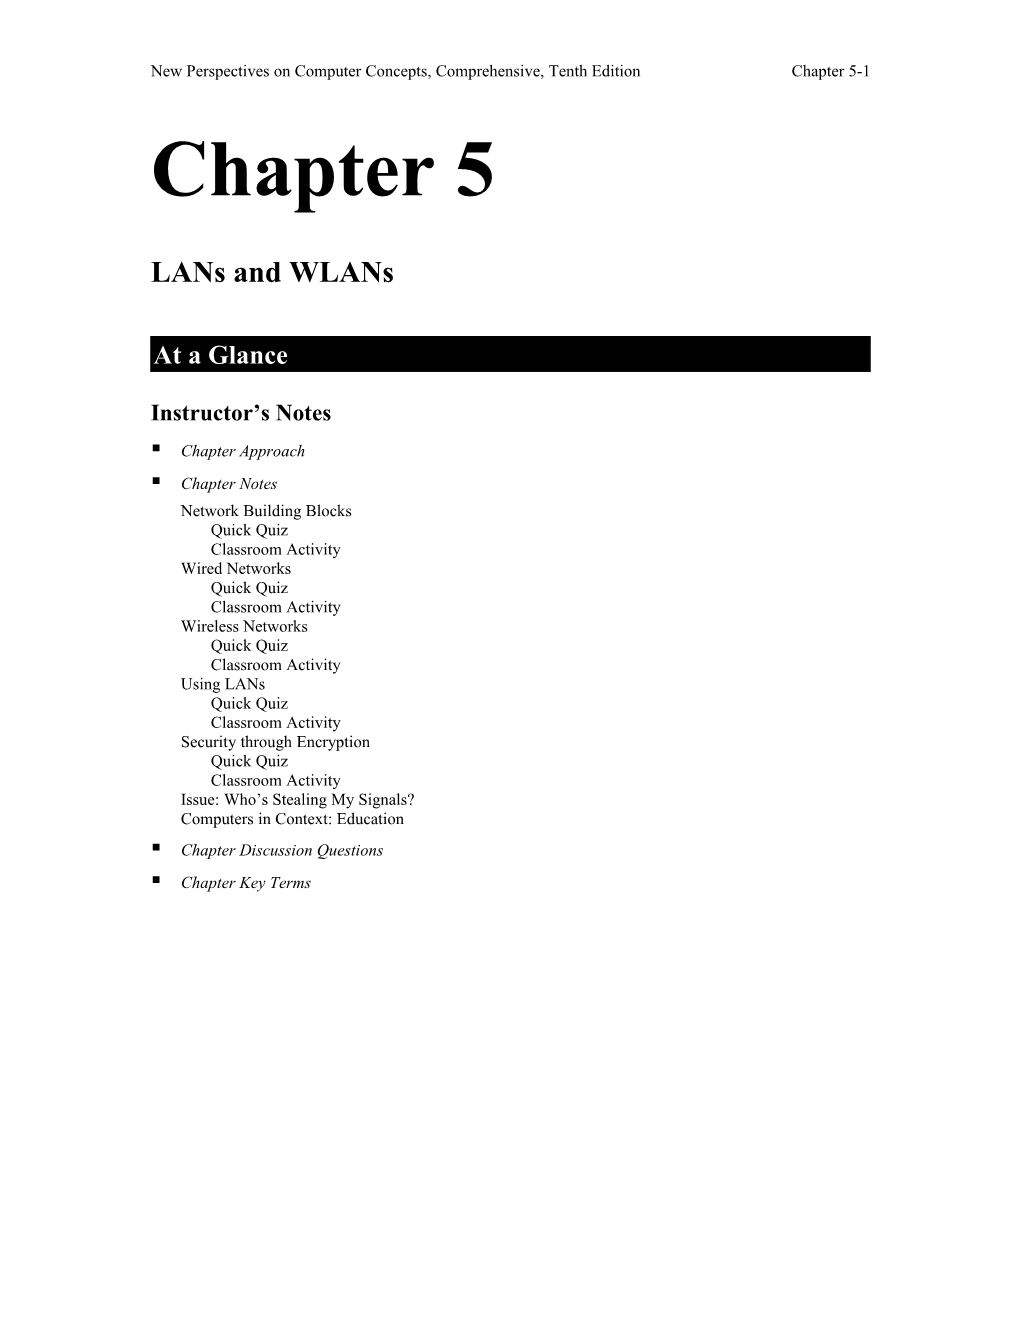 New Perspectives on Computer Concepts, Comprehensive, Tentheditionchapter 5-1